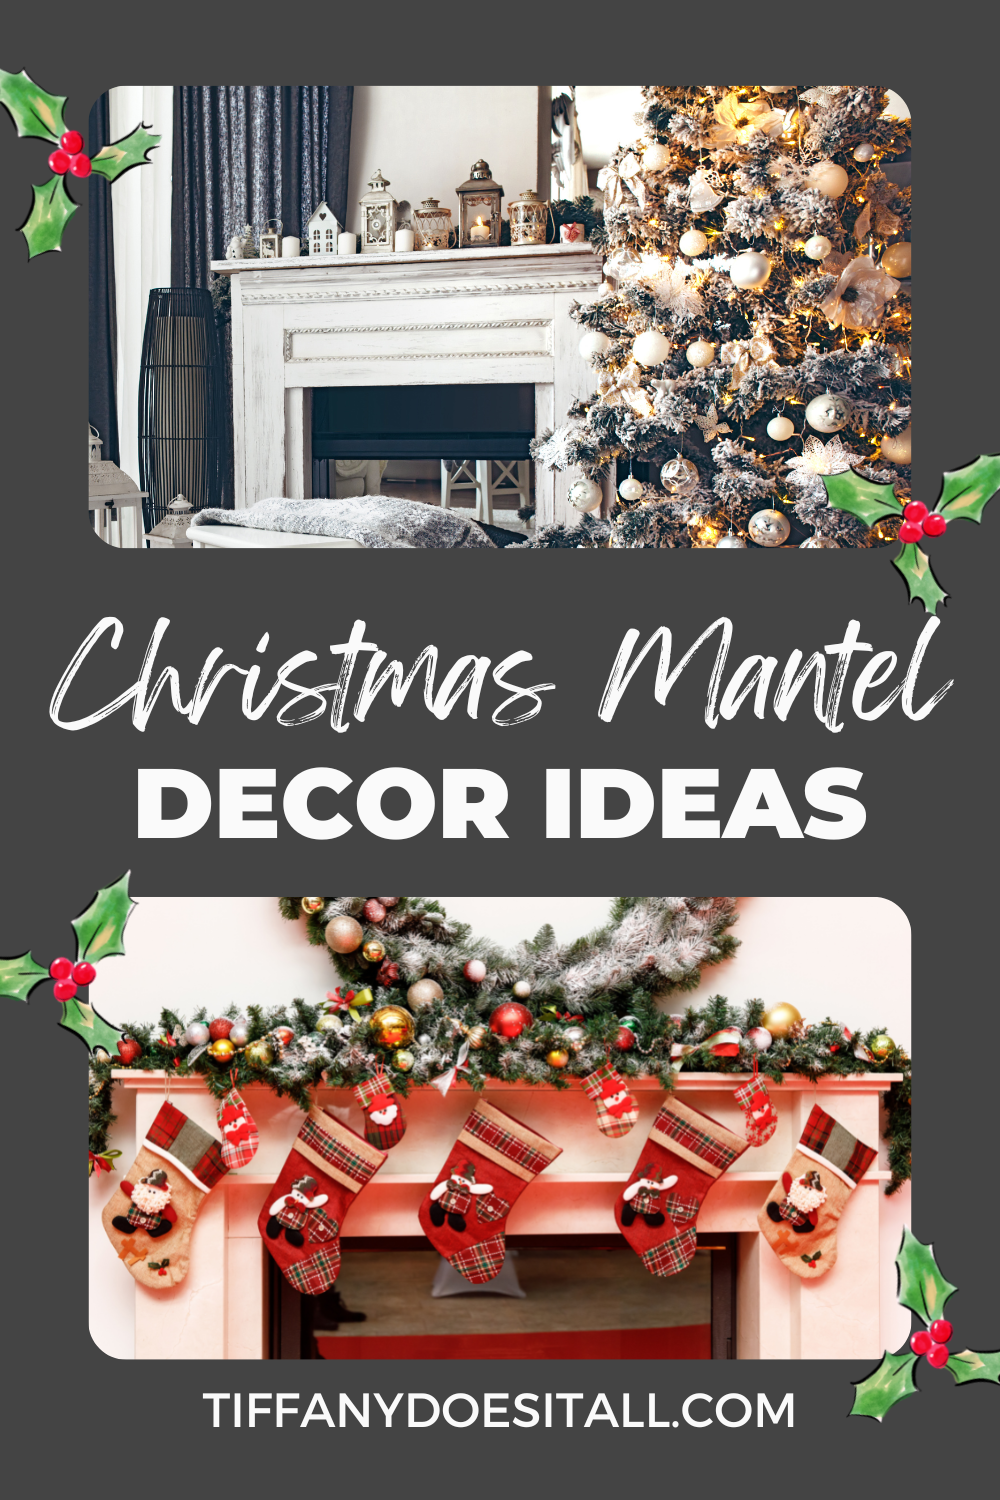 Christmas Mantel Decor on a Budget – Tiffany Does It All